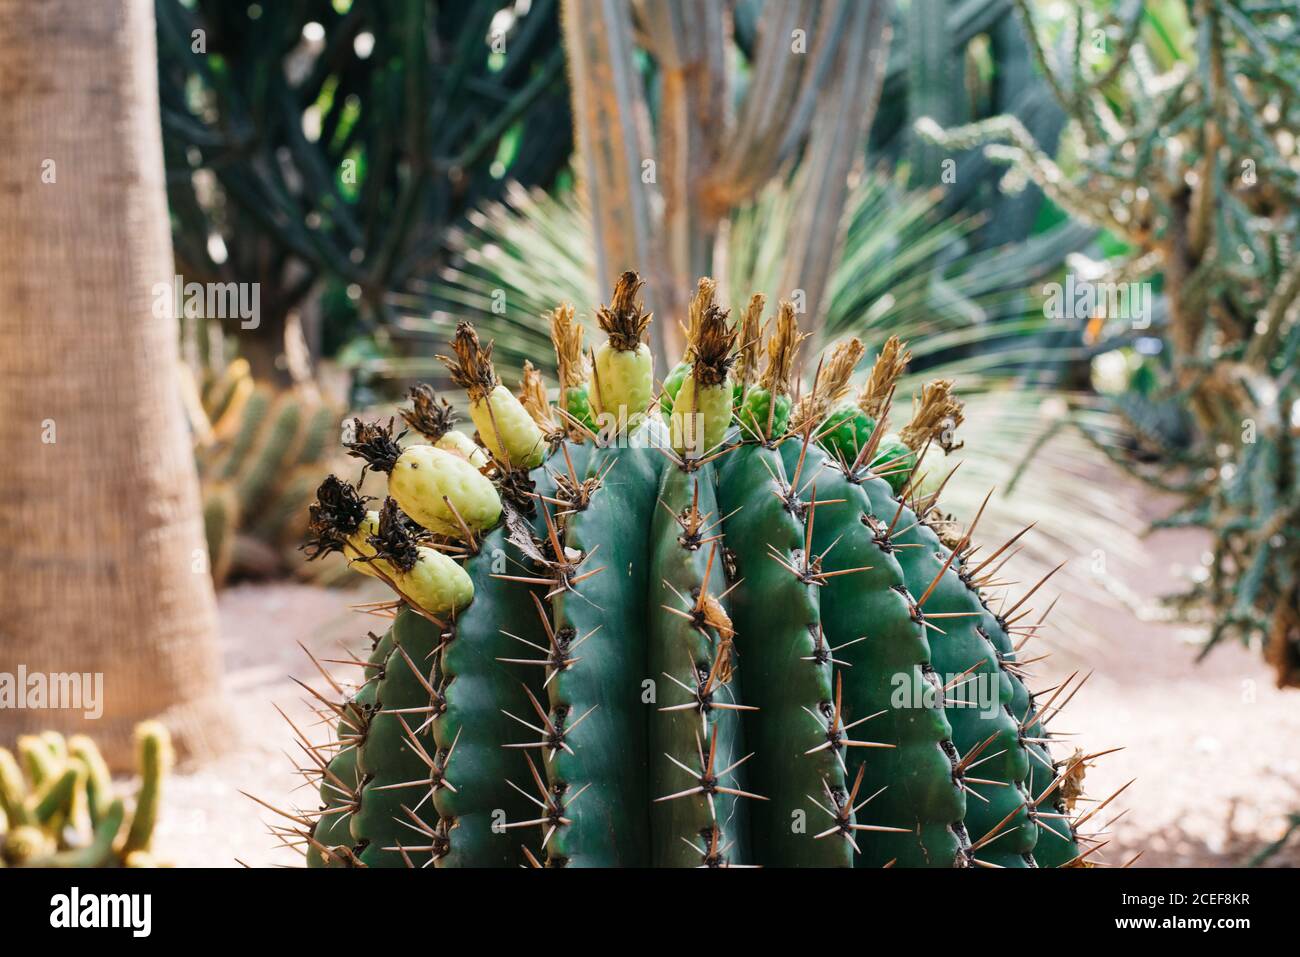 Close up of a cactus plant Stock Photo